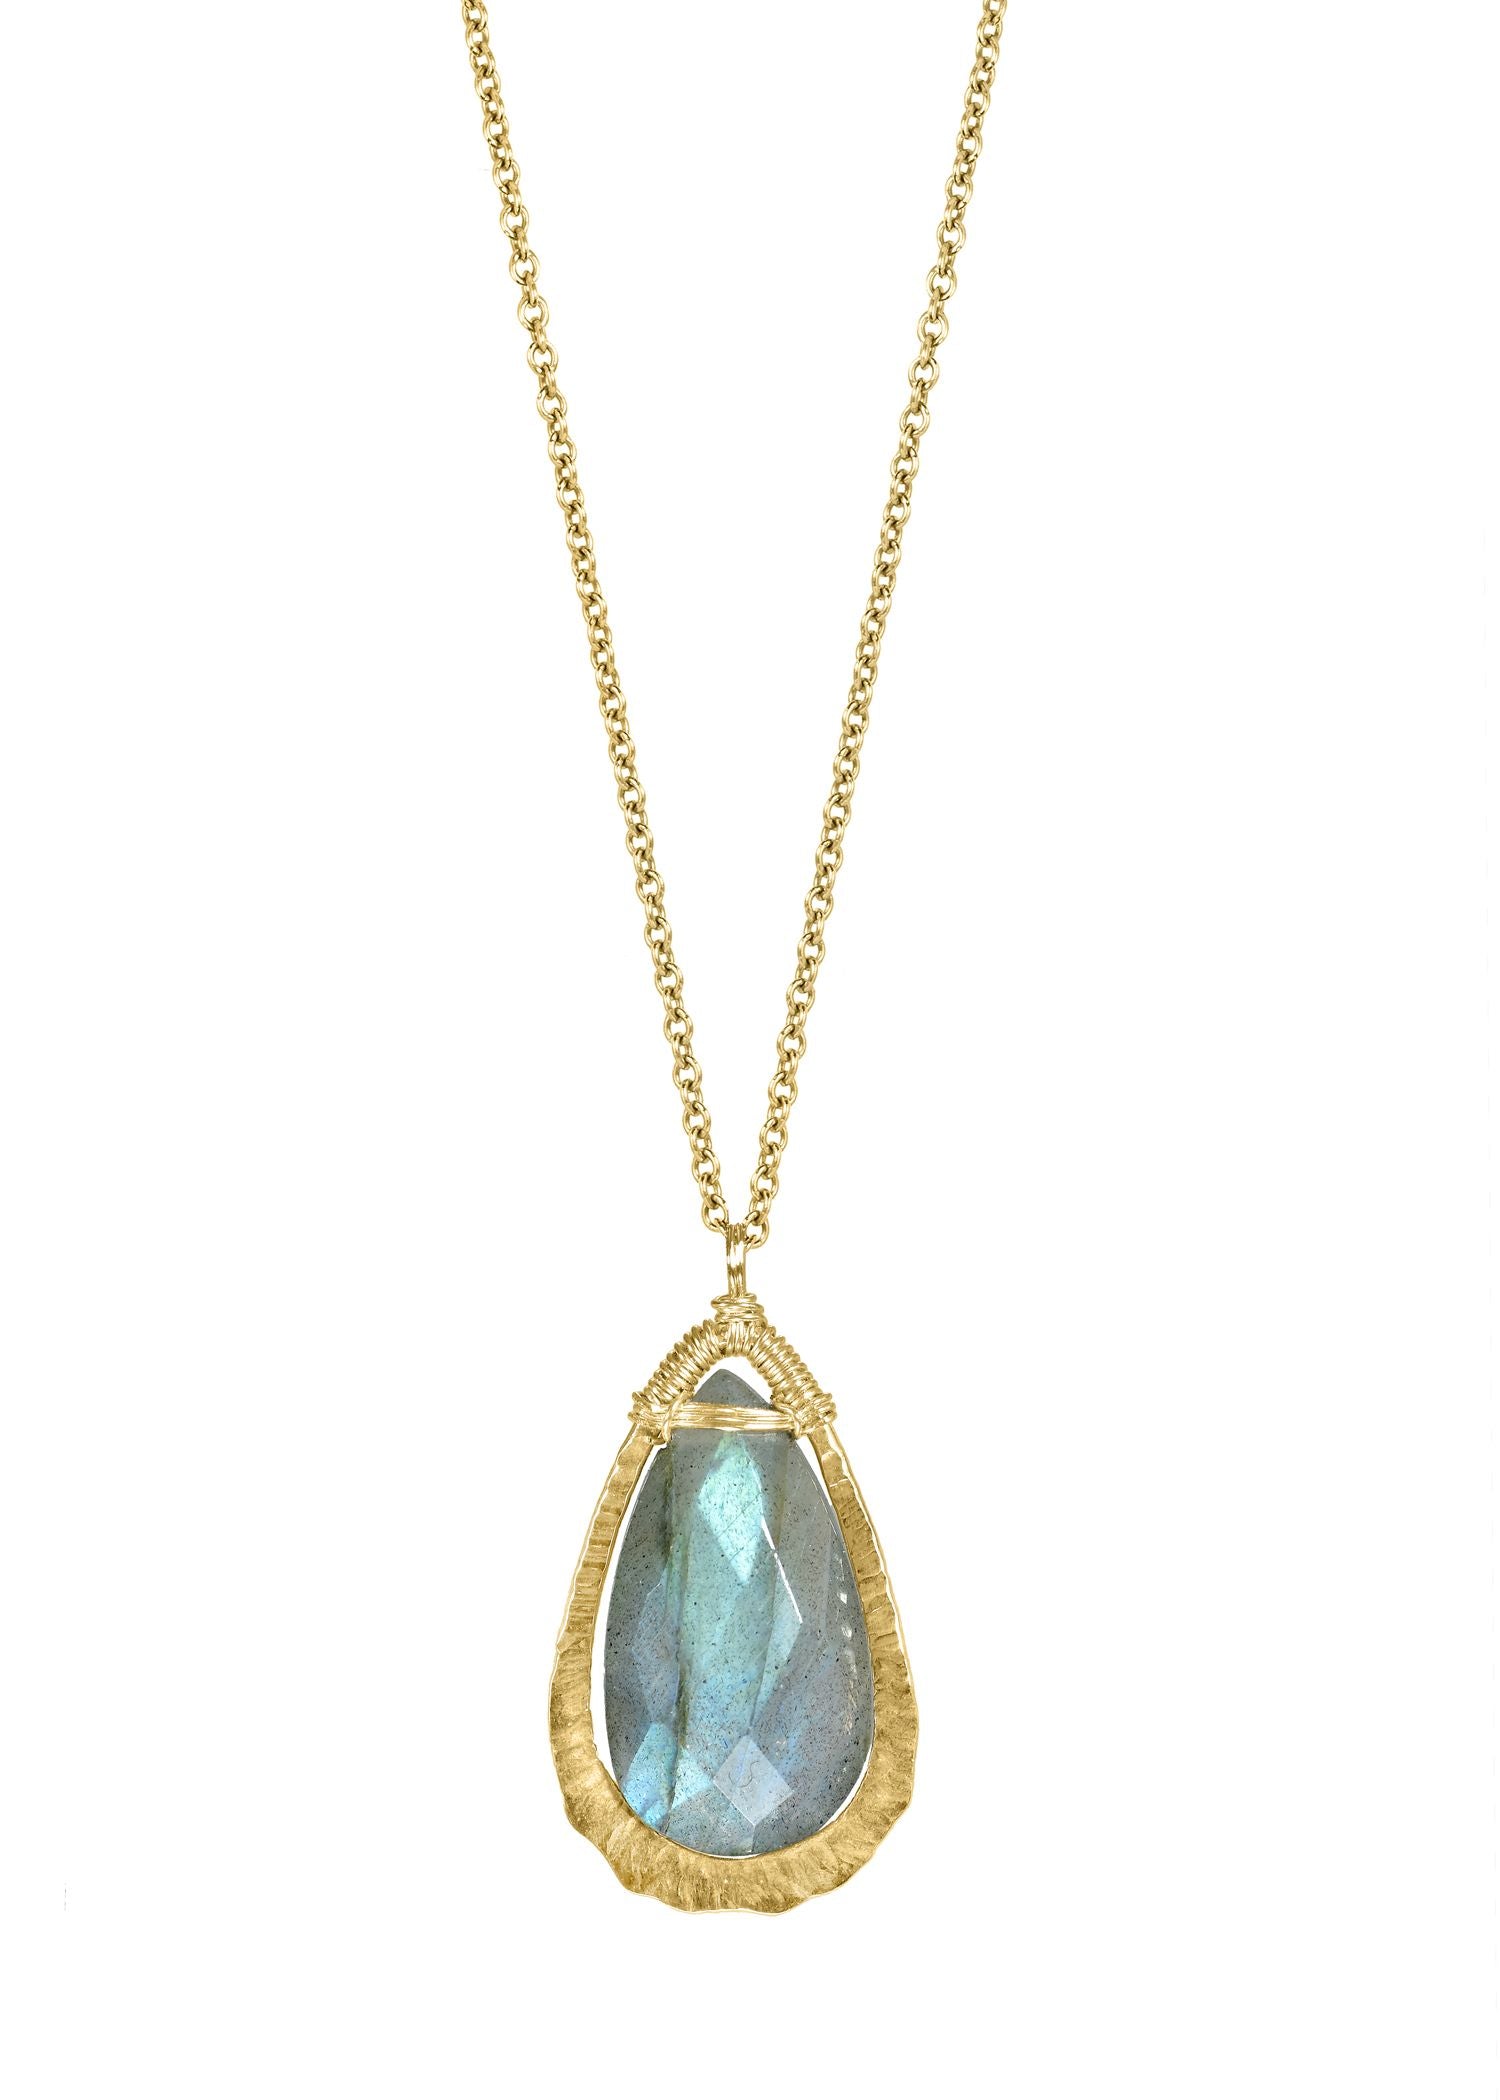 Labradorite 14k gold fill Necklace measures 18" in length Pendant measures 7/8" in length and 1/2" in width Handmade in our Los Angeles studio